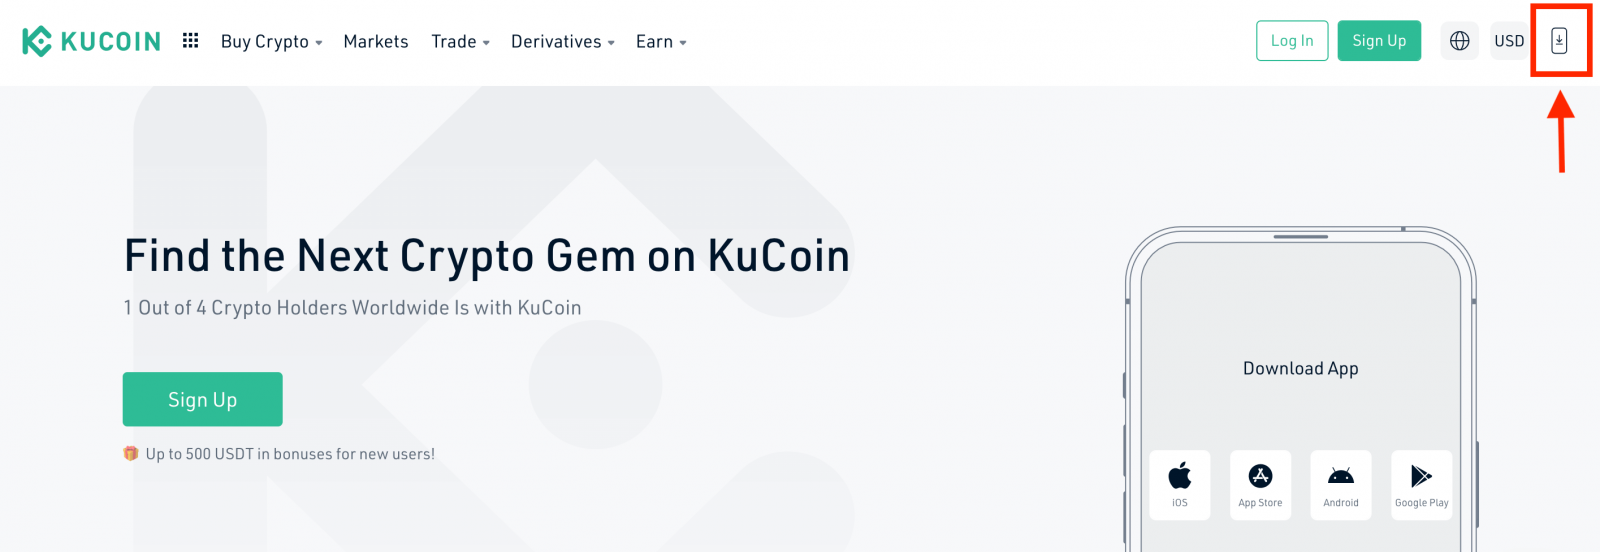 How to Open a Trading Account in KuCoin